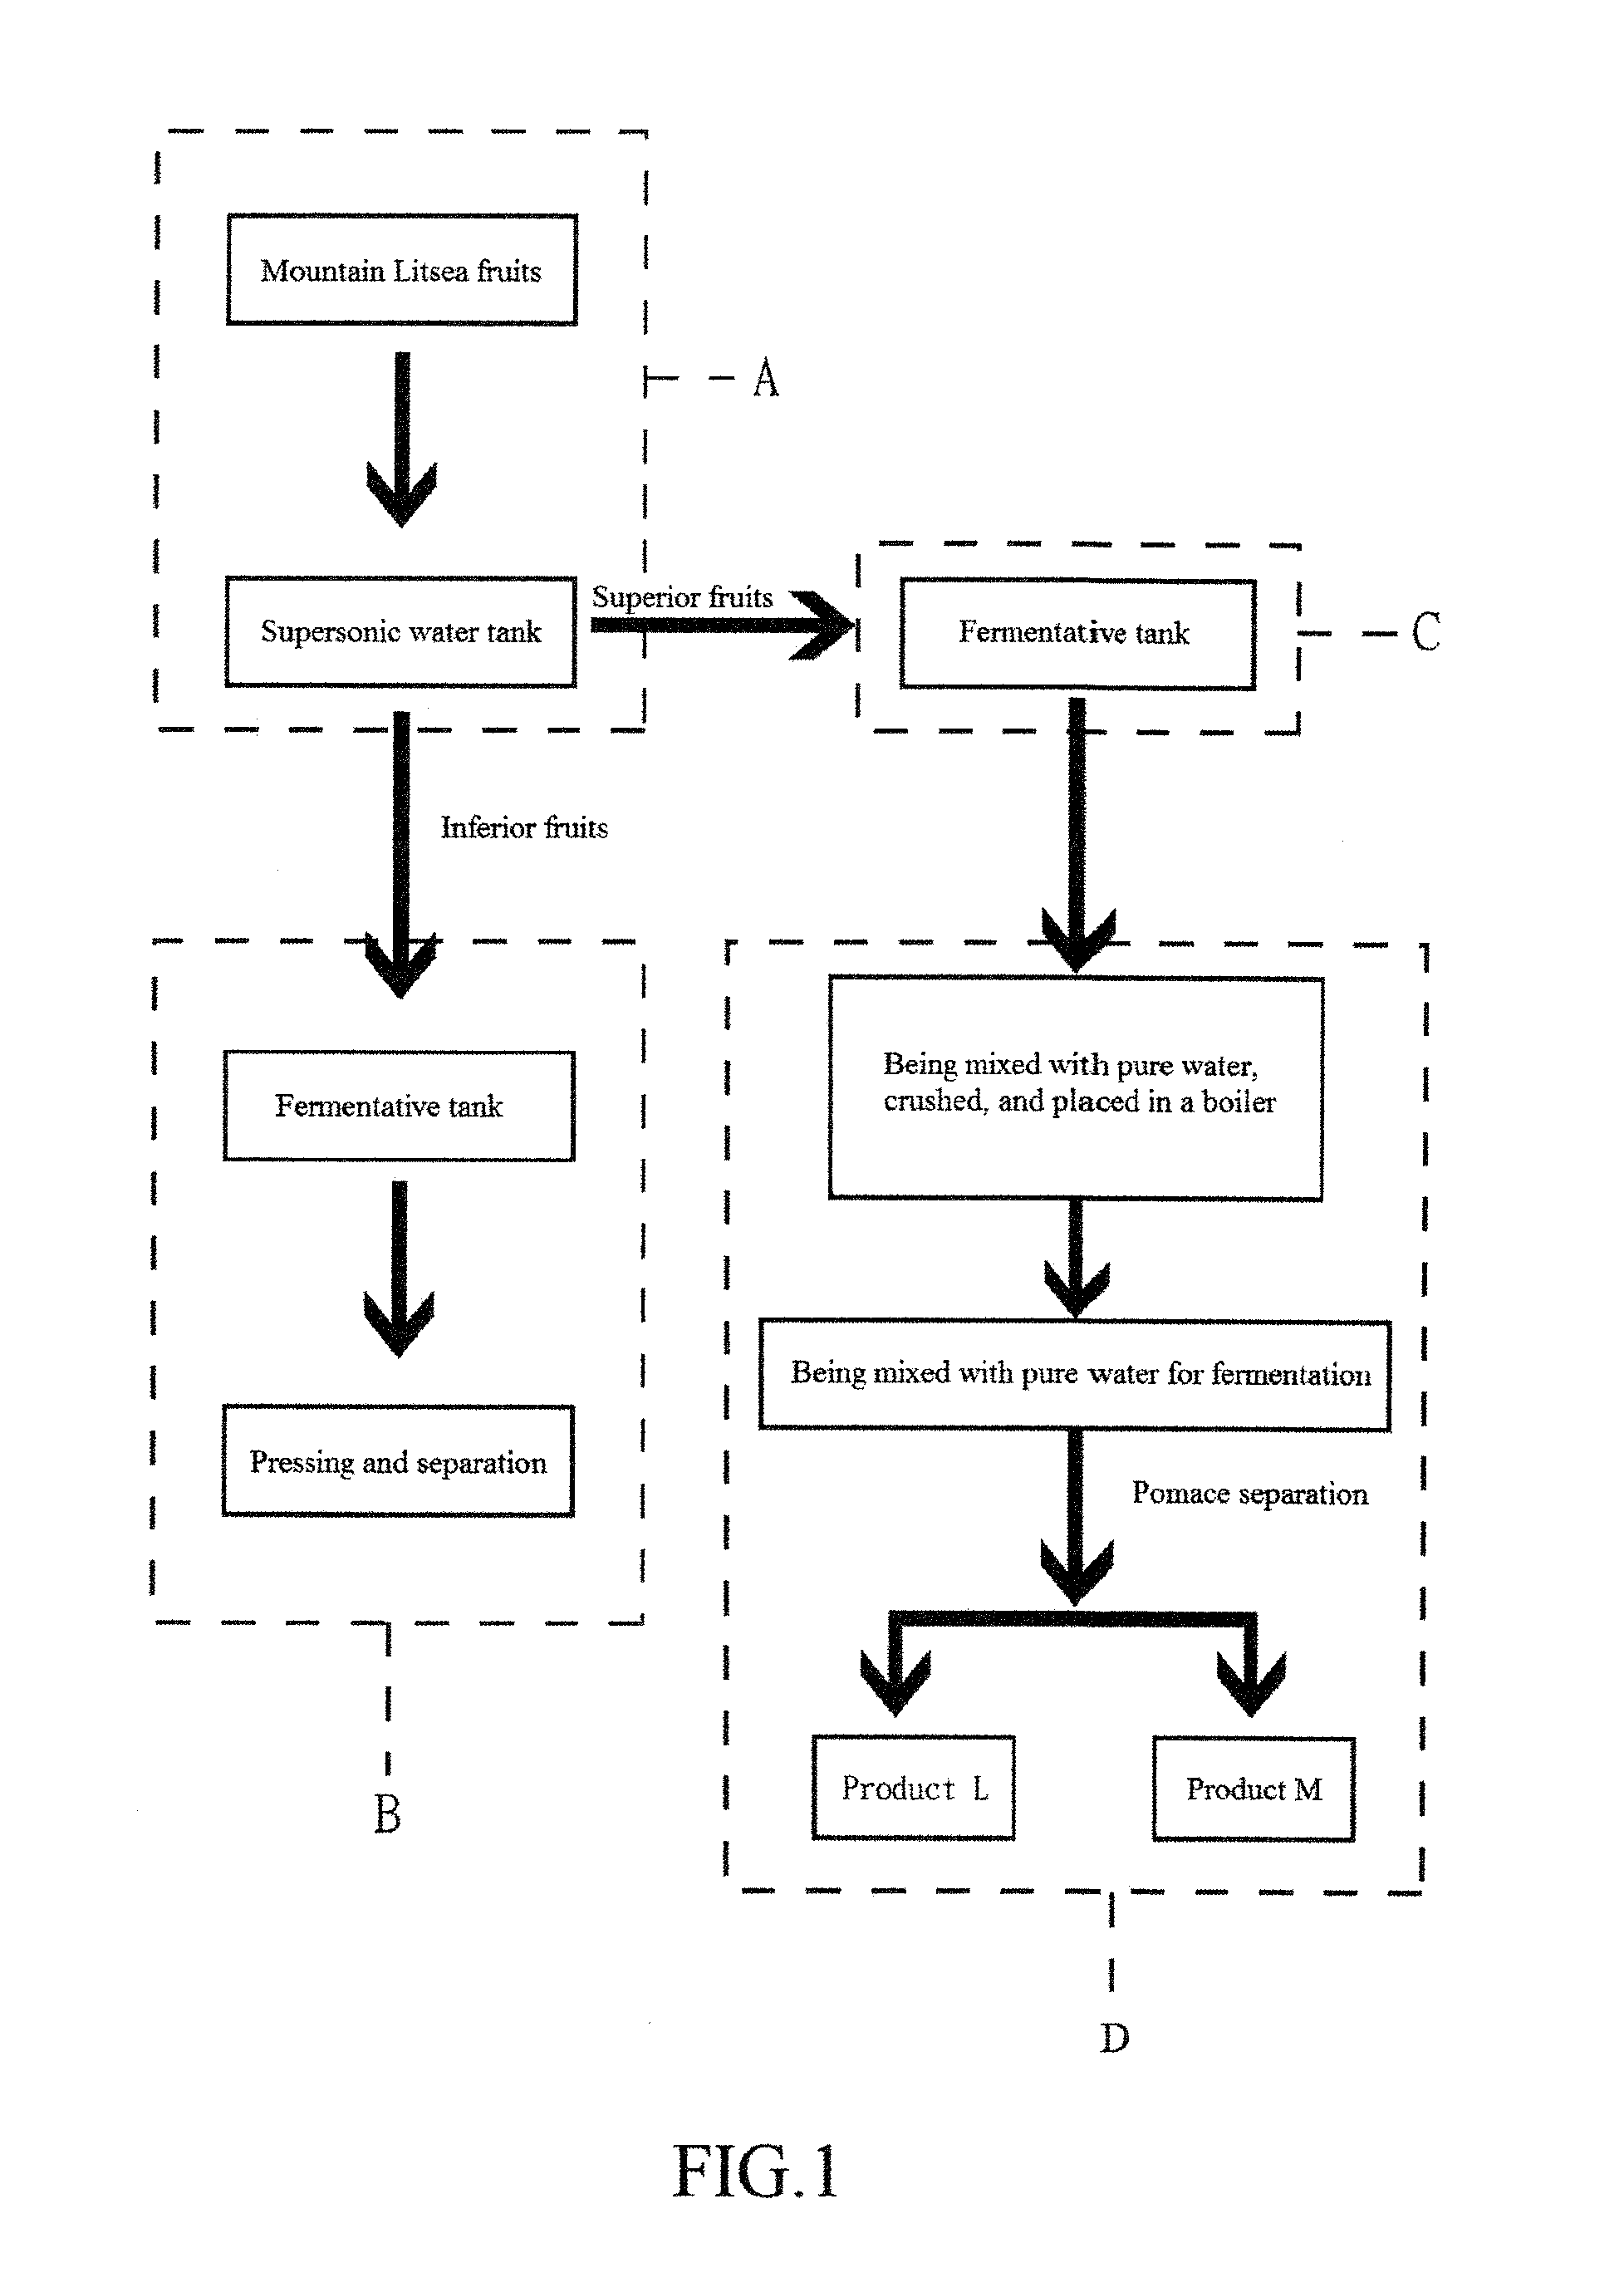 Method of producing organic product from mountain litsea